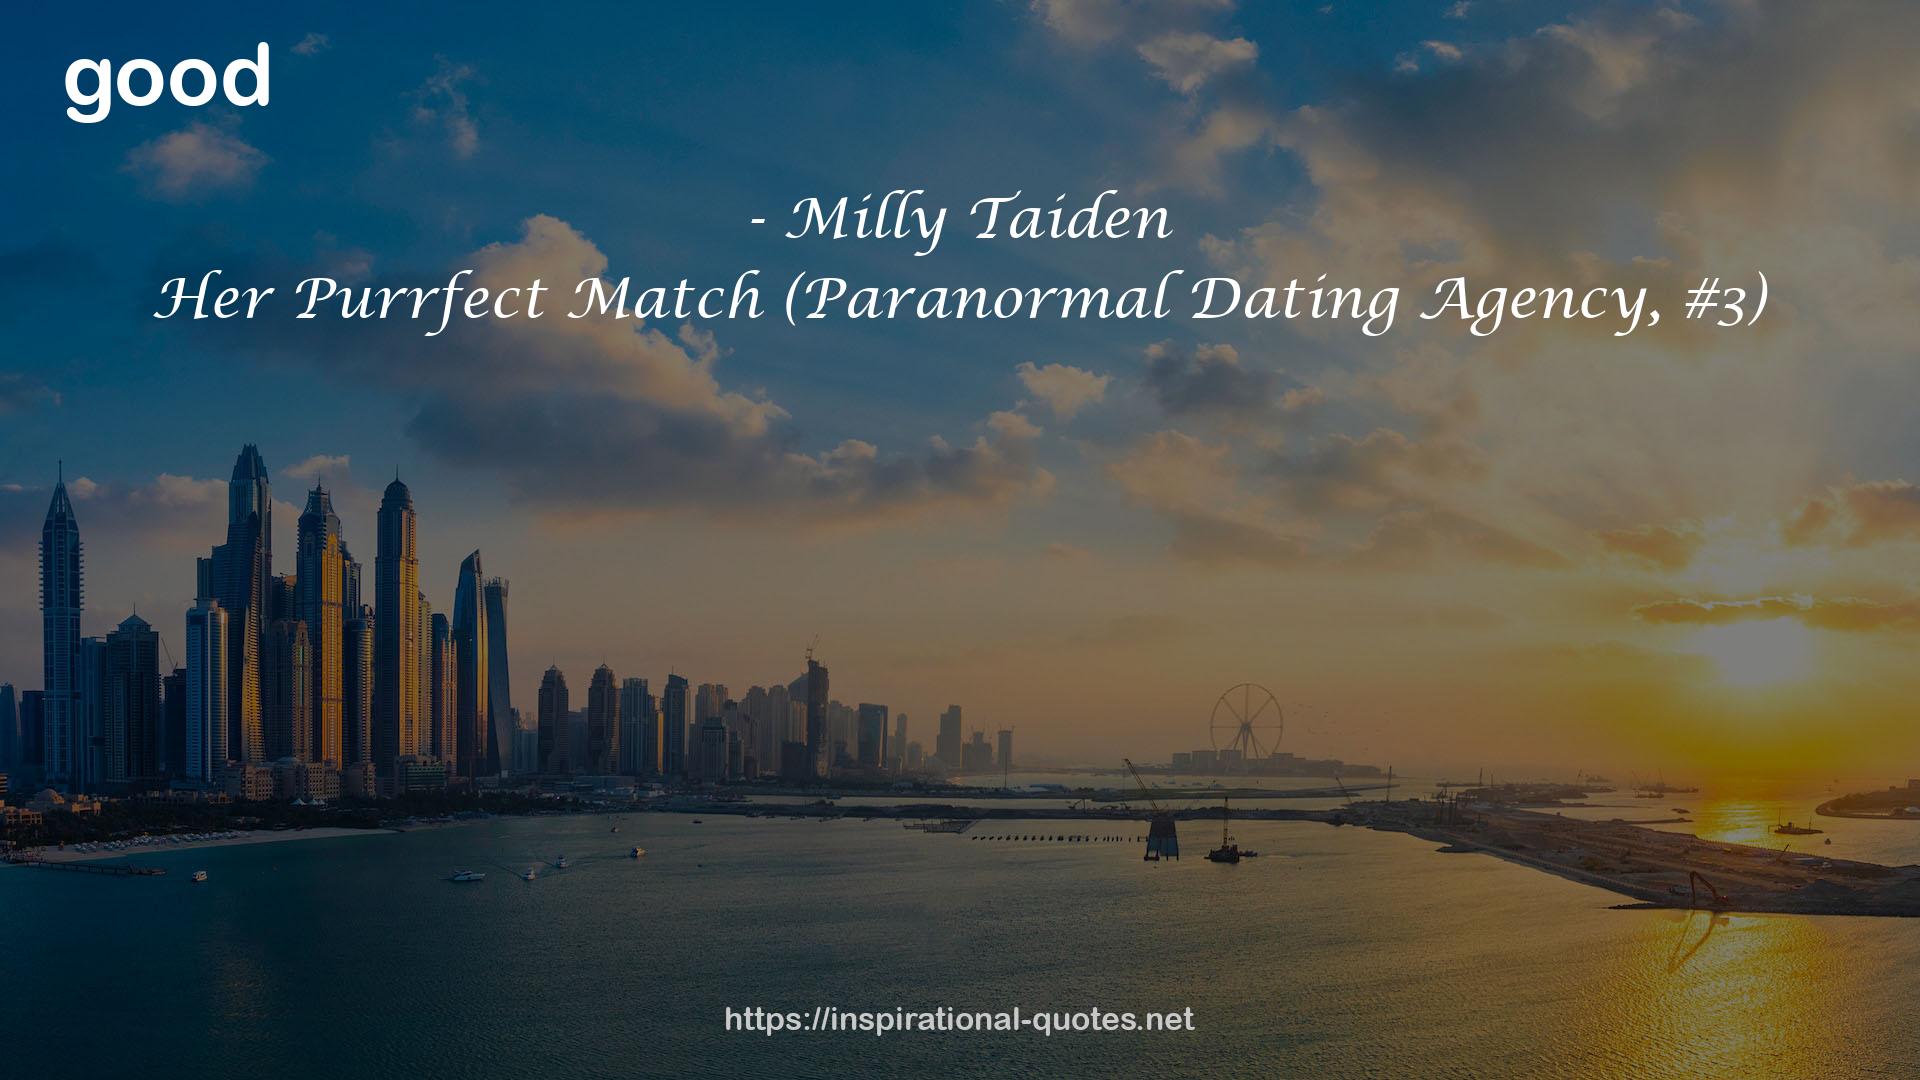 Her Purrfect Match (Paranormal Dating Agency, #3) QUOTES